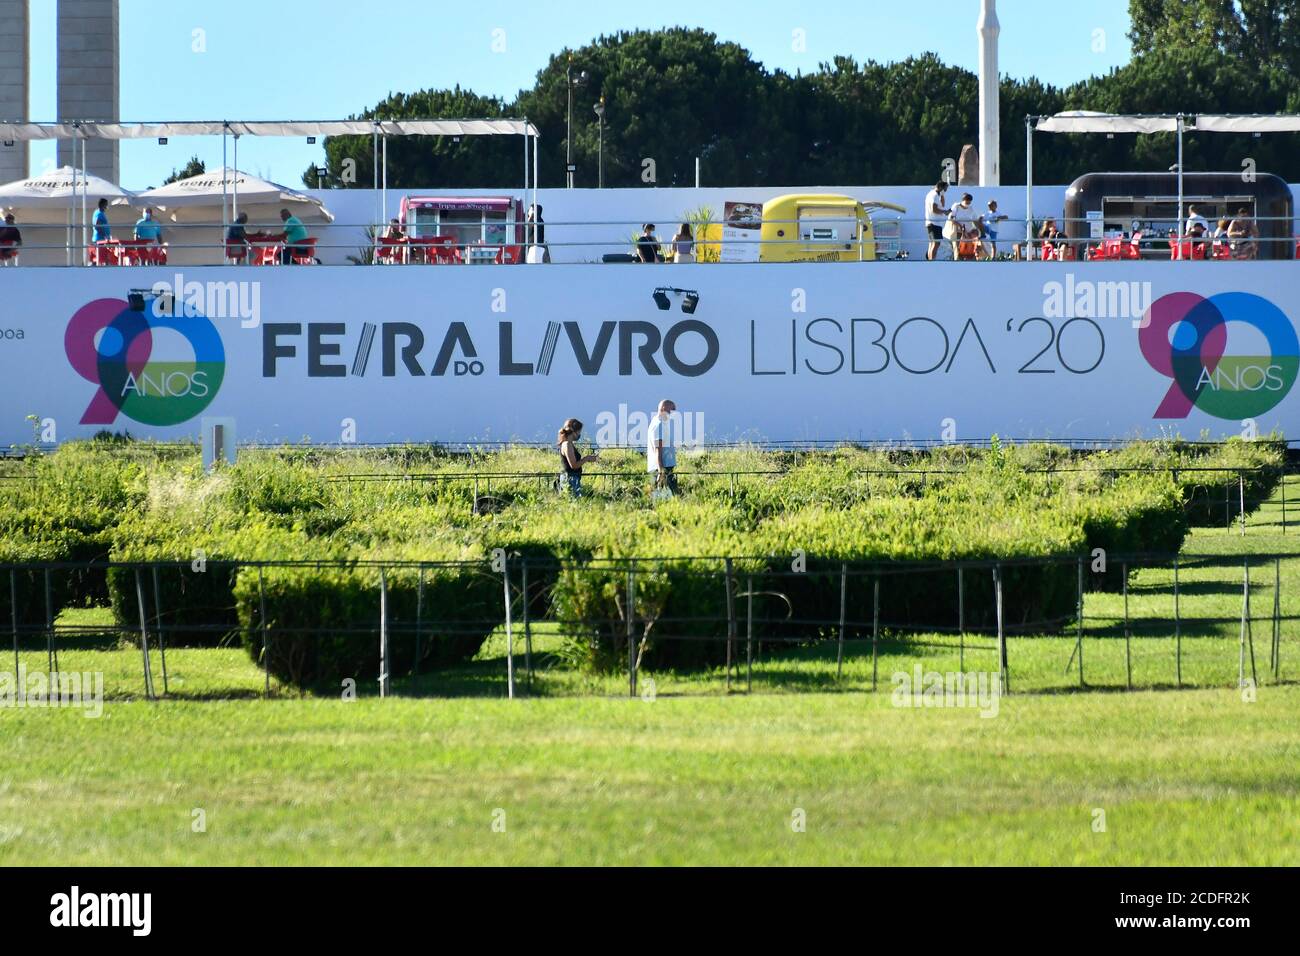 Lisbon, Portugal. 27th Aug, 2020. People visit the Lisbon Book Fair 2020 in Lisbon, Portugal.The 90th edition of the Lisbon Book Fair, originally scheduled for May/June, kicked off on Aug. 27 due to the COVID-19 pandemic. Credit: SOPA Images Limited/Alamy Live News Stock Photo